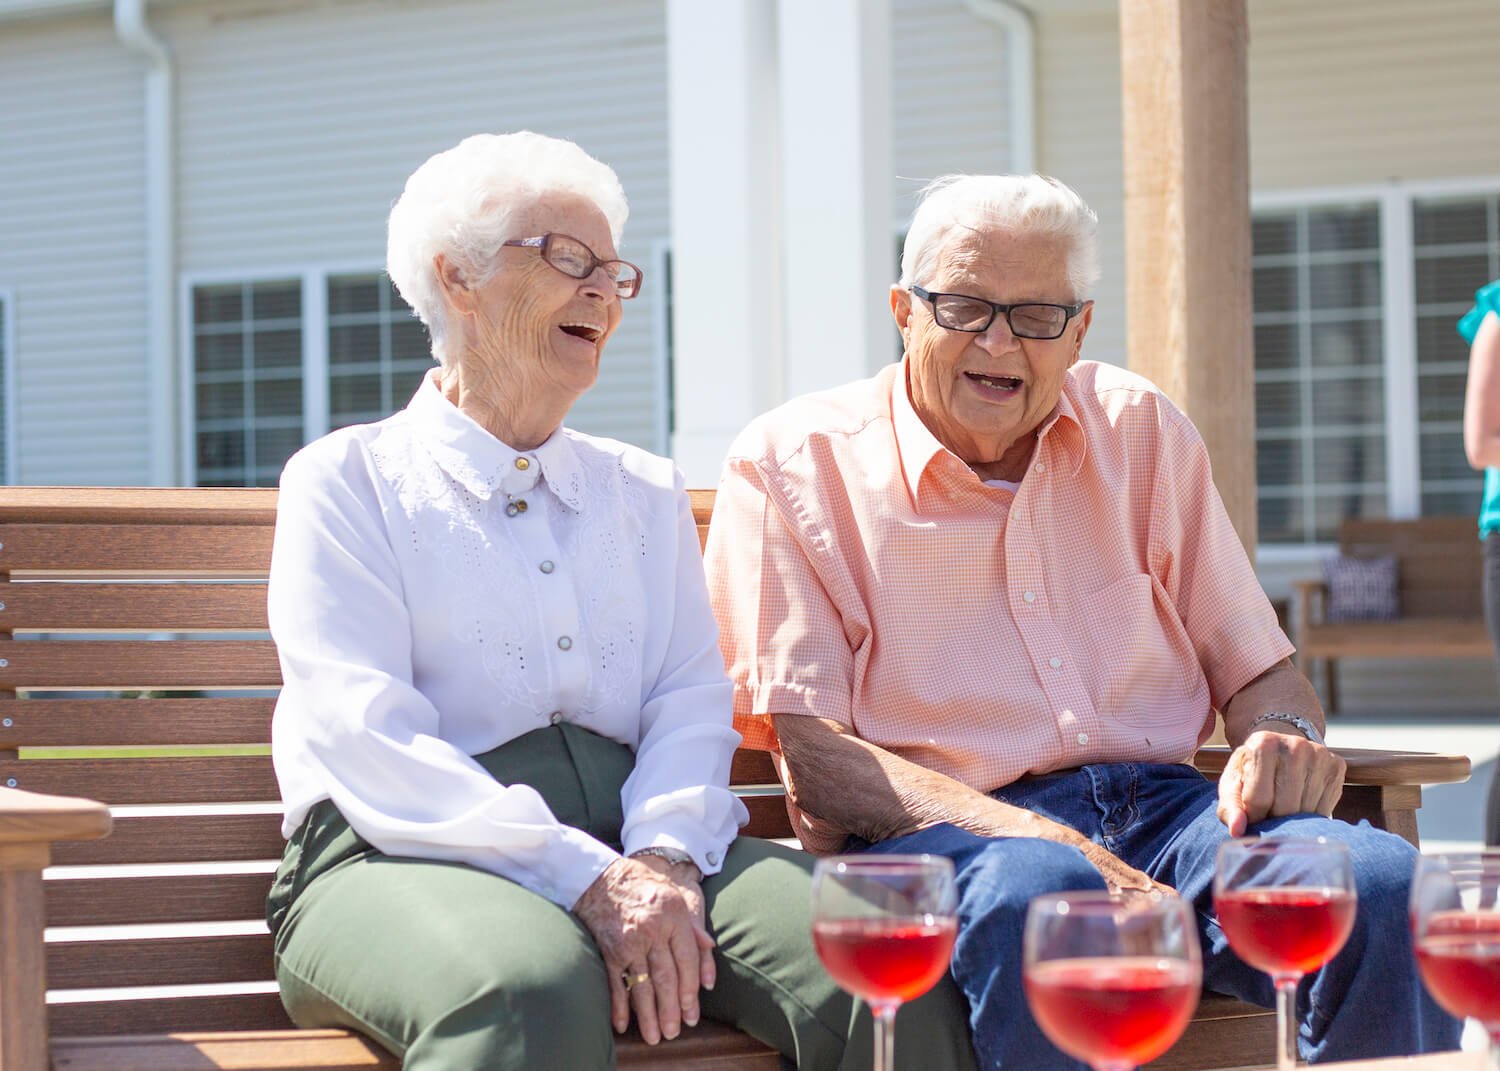 Two senior residents laughing on a bench outside